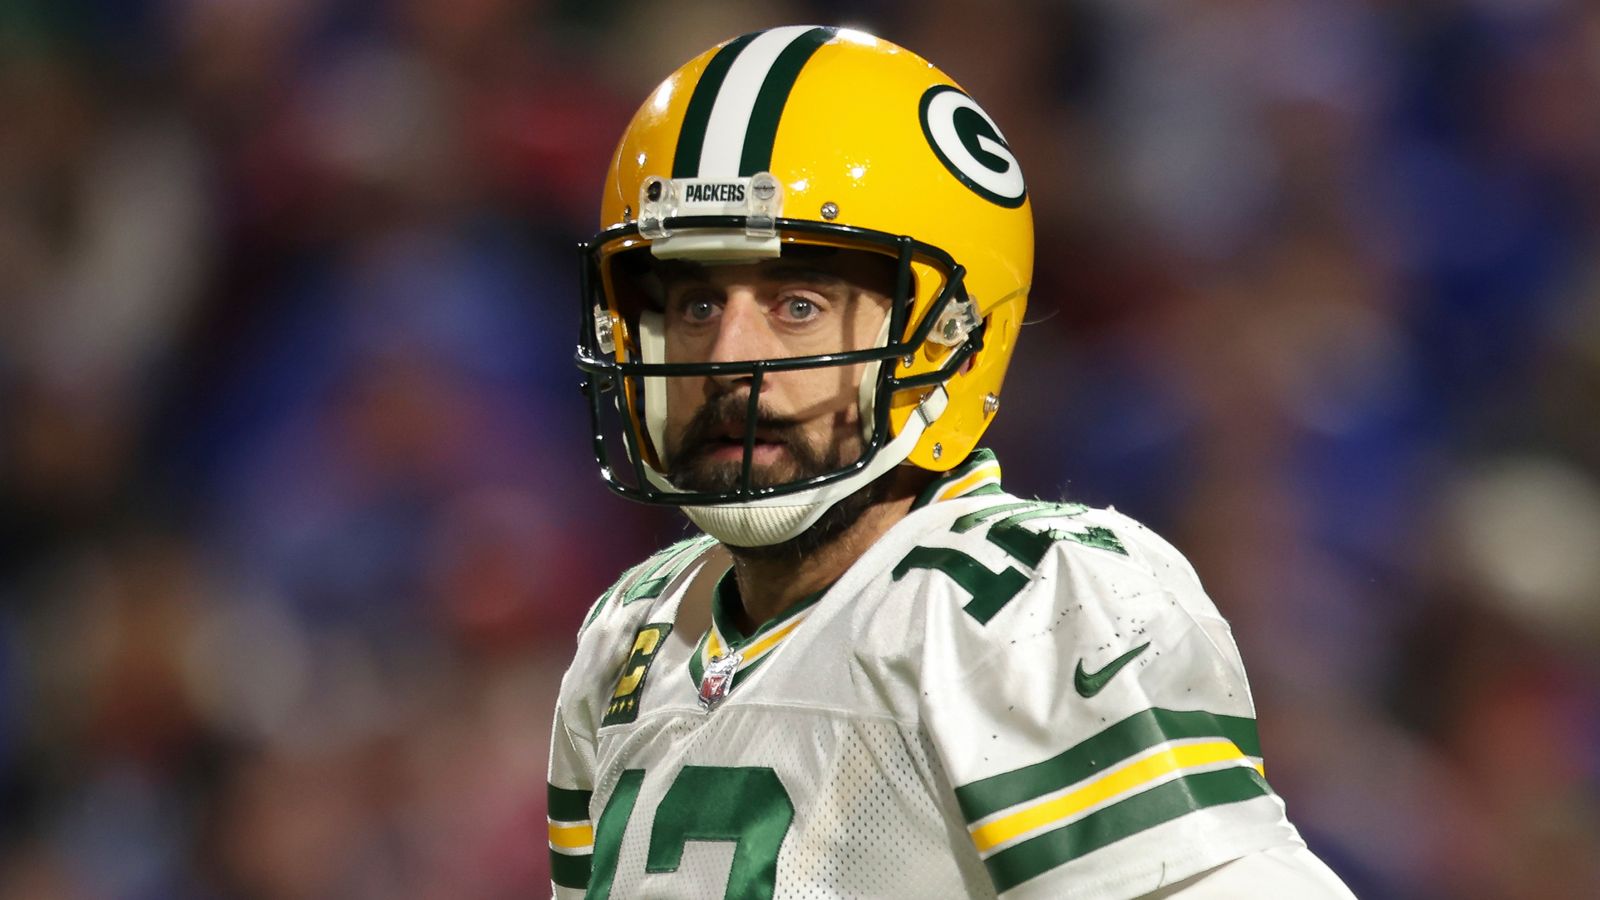 Green Bay Packers 17-27 Buffalo Bills: Stefon Diggs leads Bills to victory as Aaron Rogers’ Packers suffer fourth consecutive defeat | NFL News